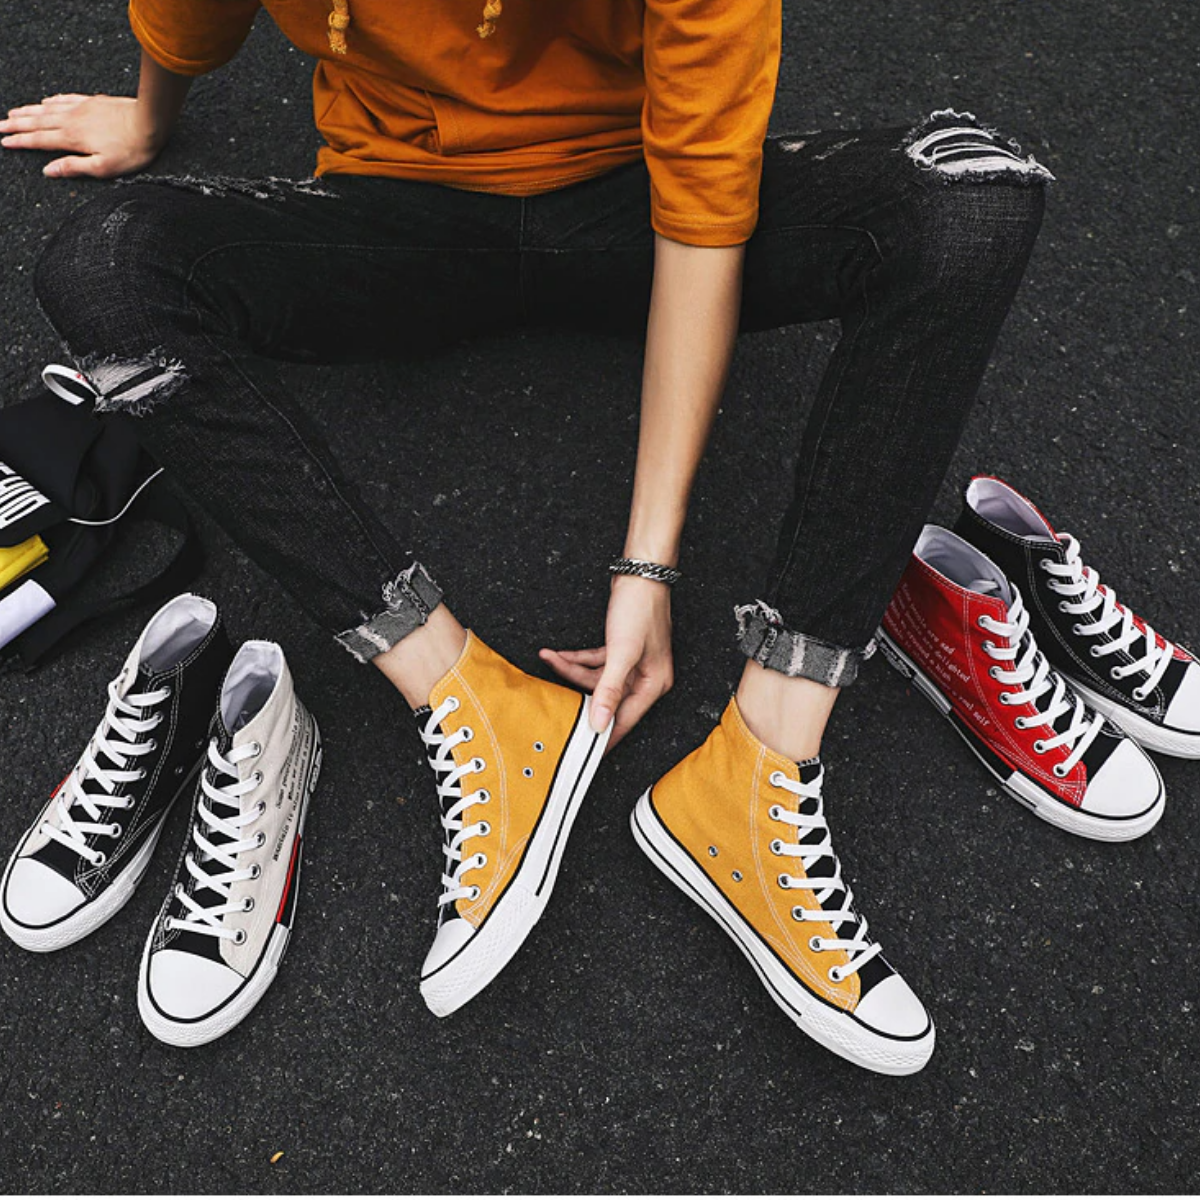 Fashion High Top Sneakers